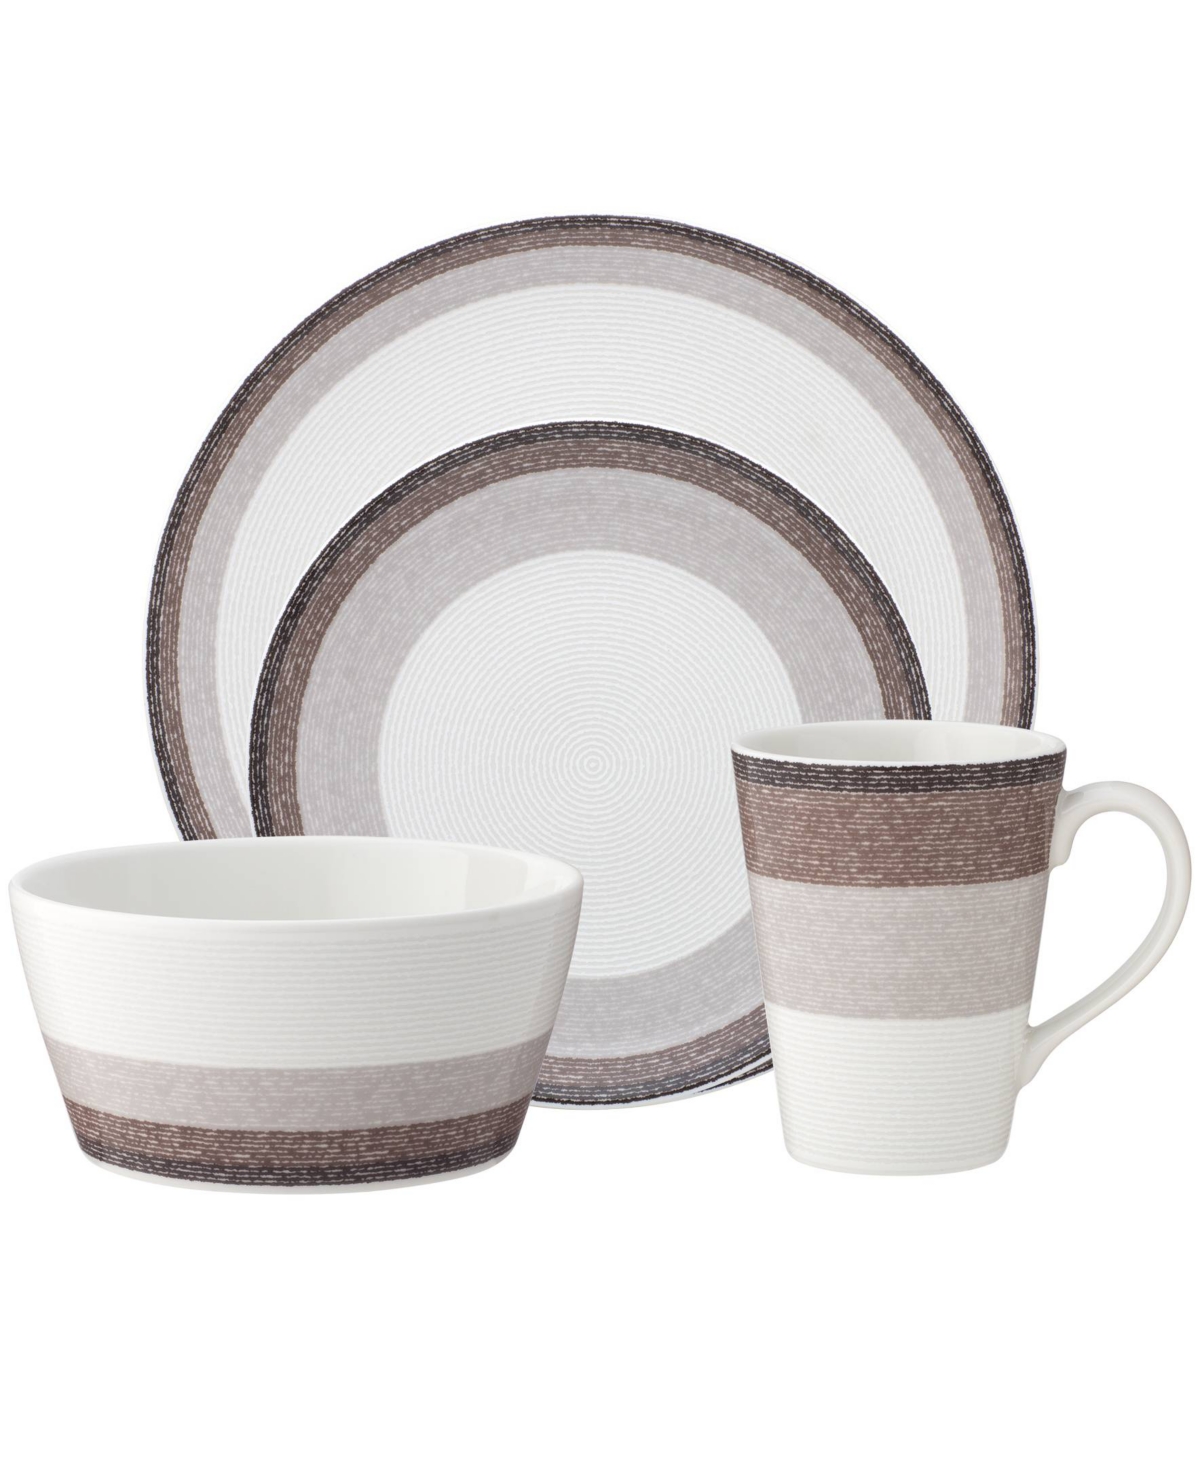 Colorscapes Canyon Layers 4 Piece Coupe Place Setting - Canyon